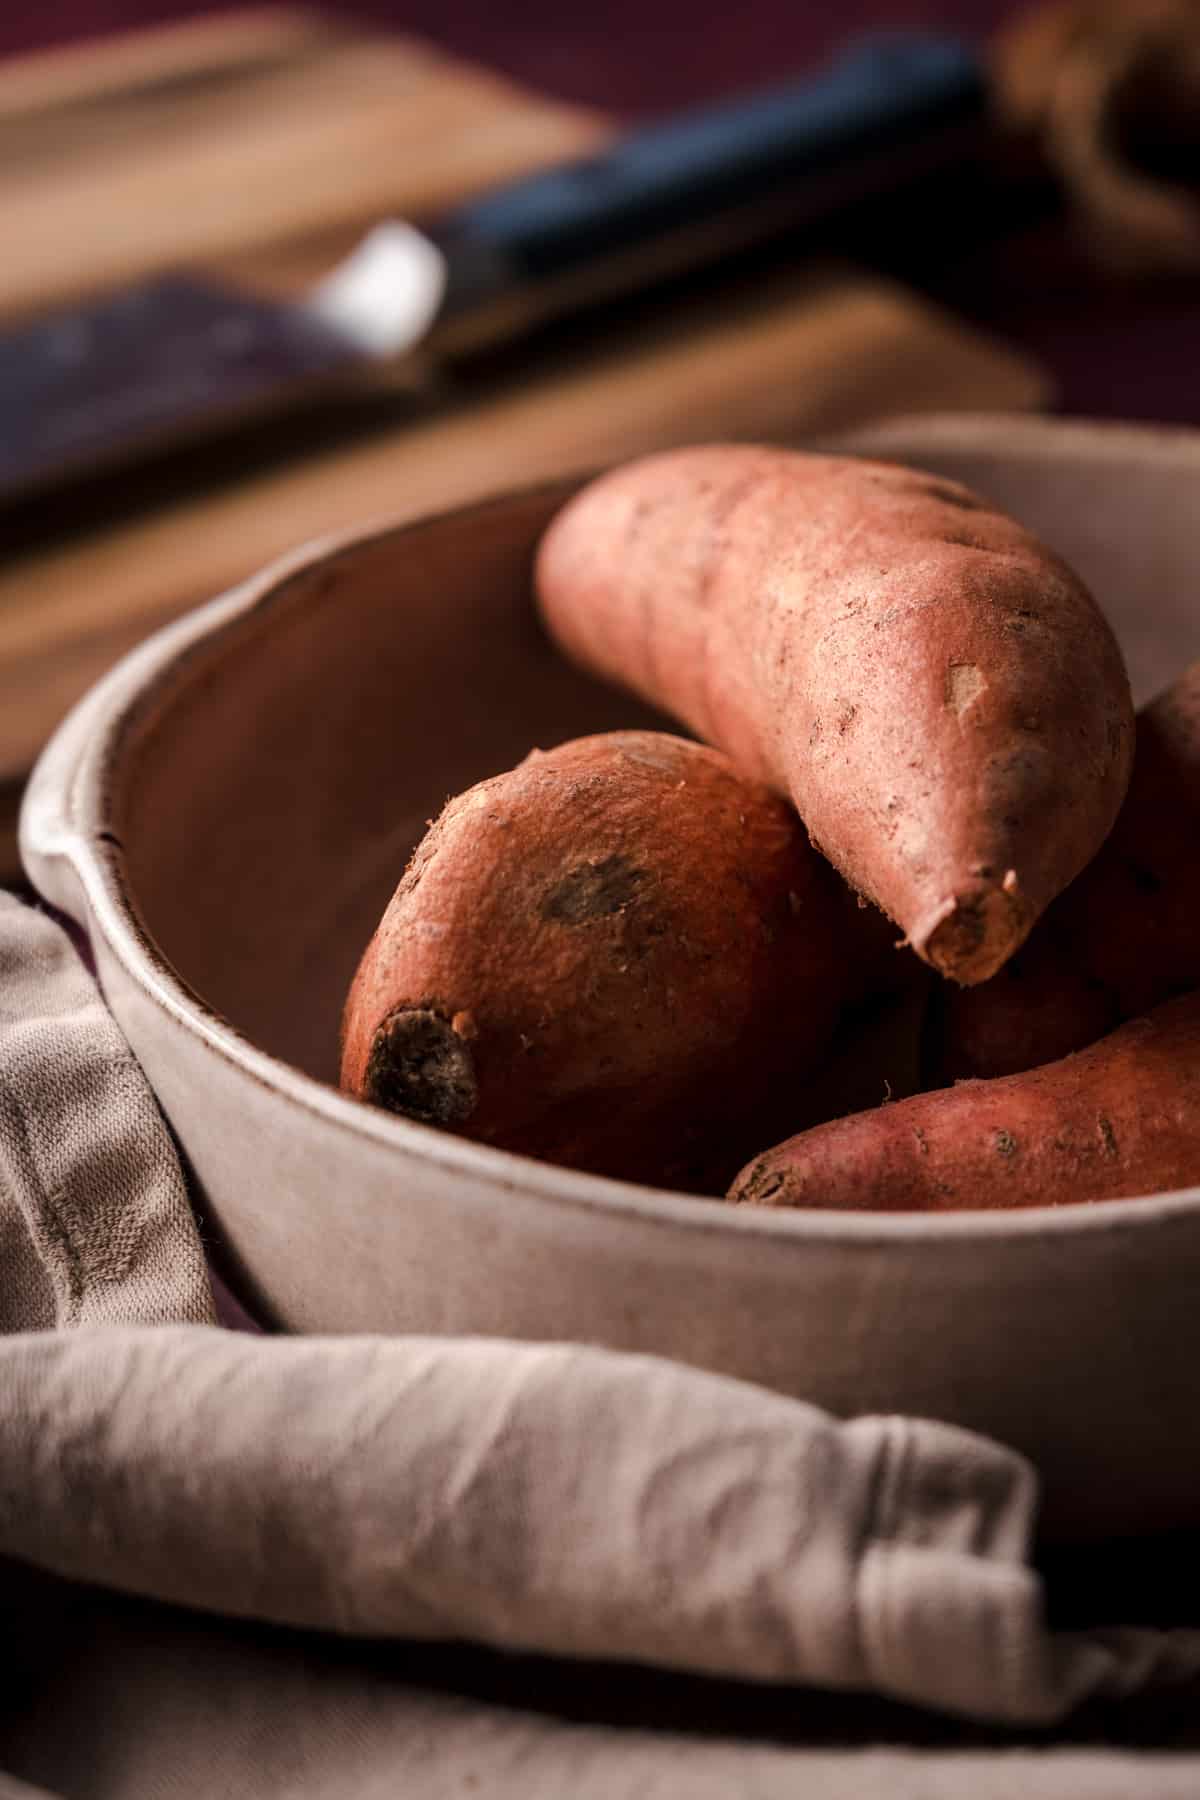 Ceramic bowl with several sweet potatoes in it.